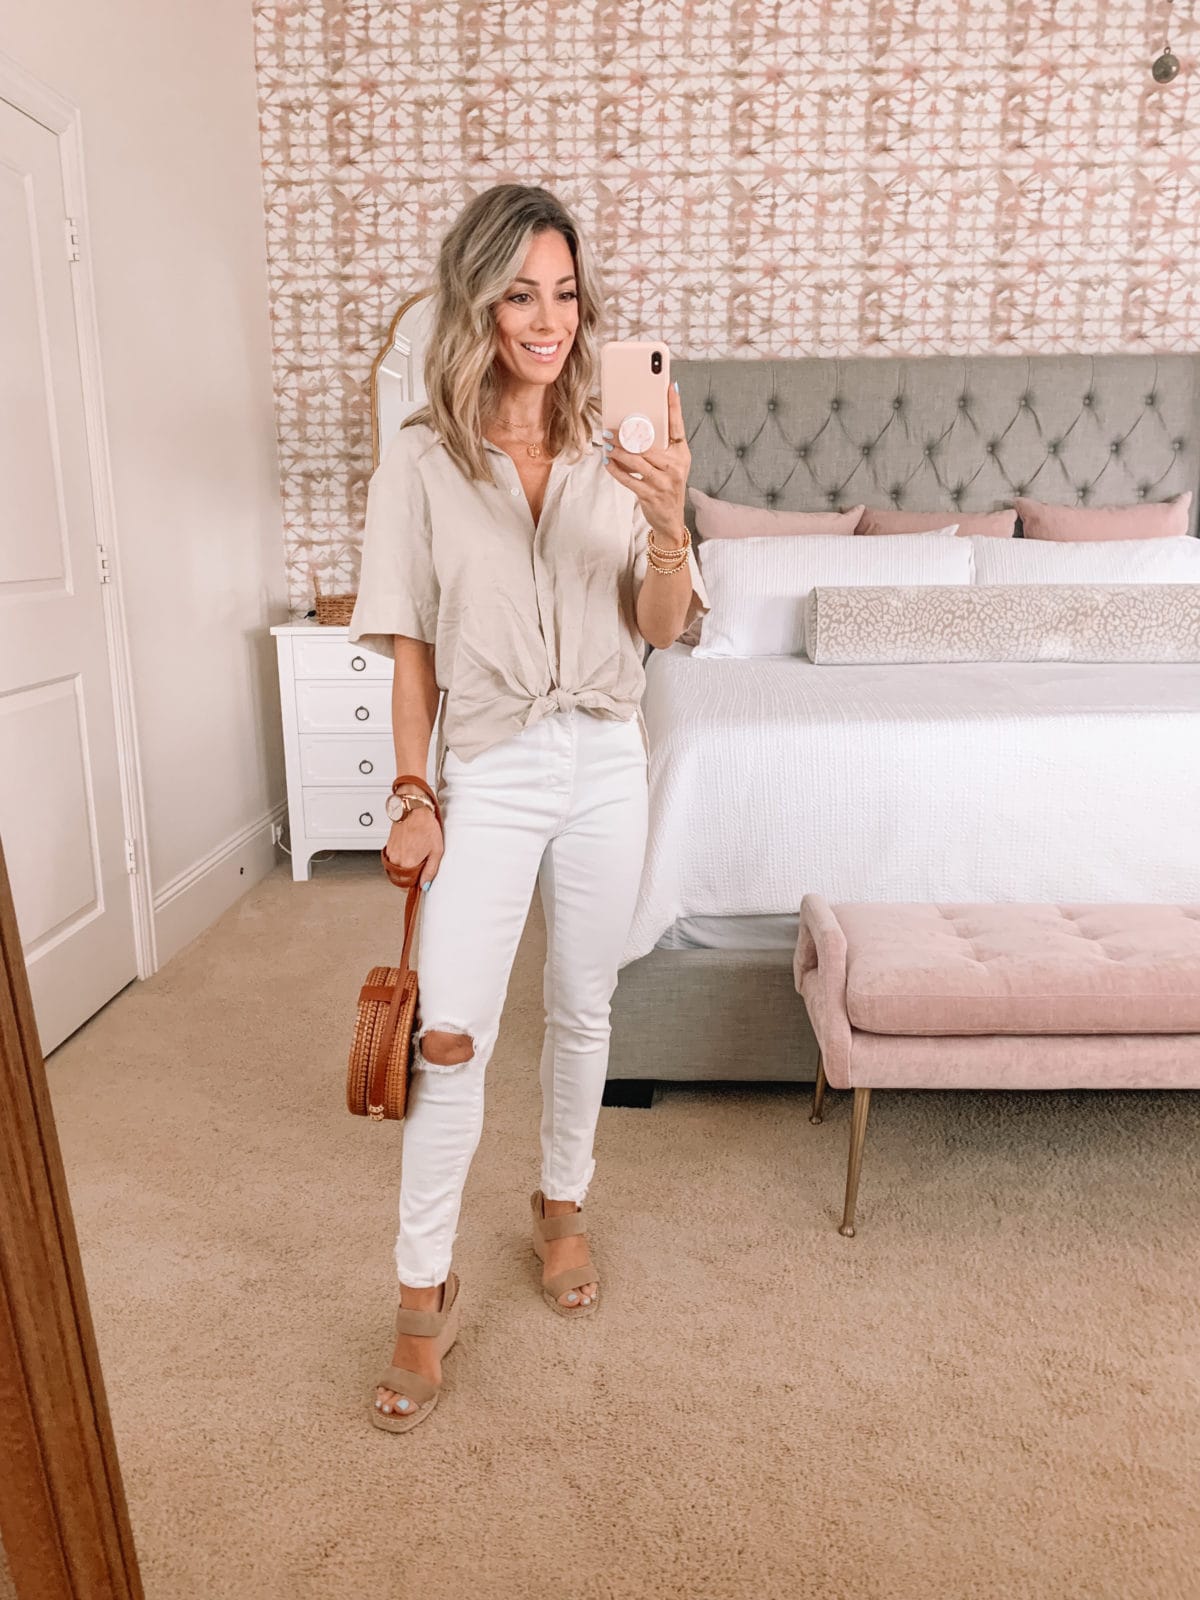 Dressing Room Finds, Knot front top and white jeans with Crossbody and wedges 